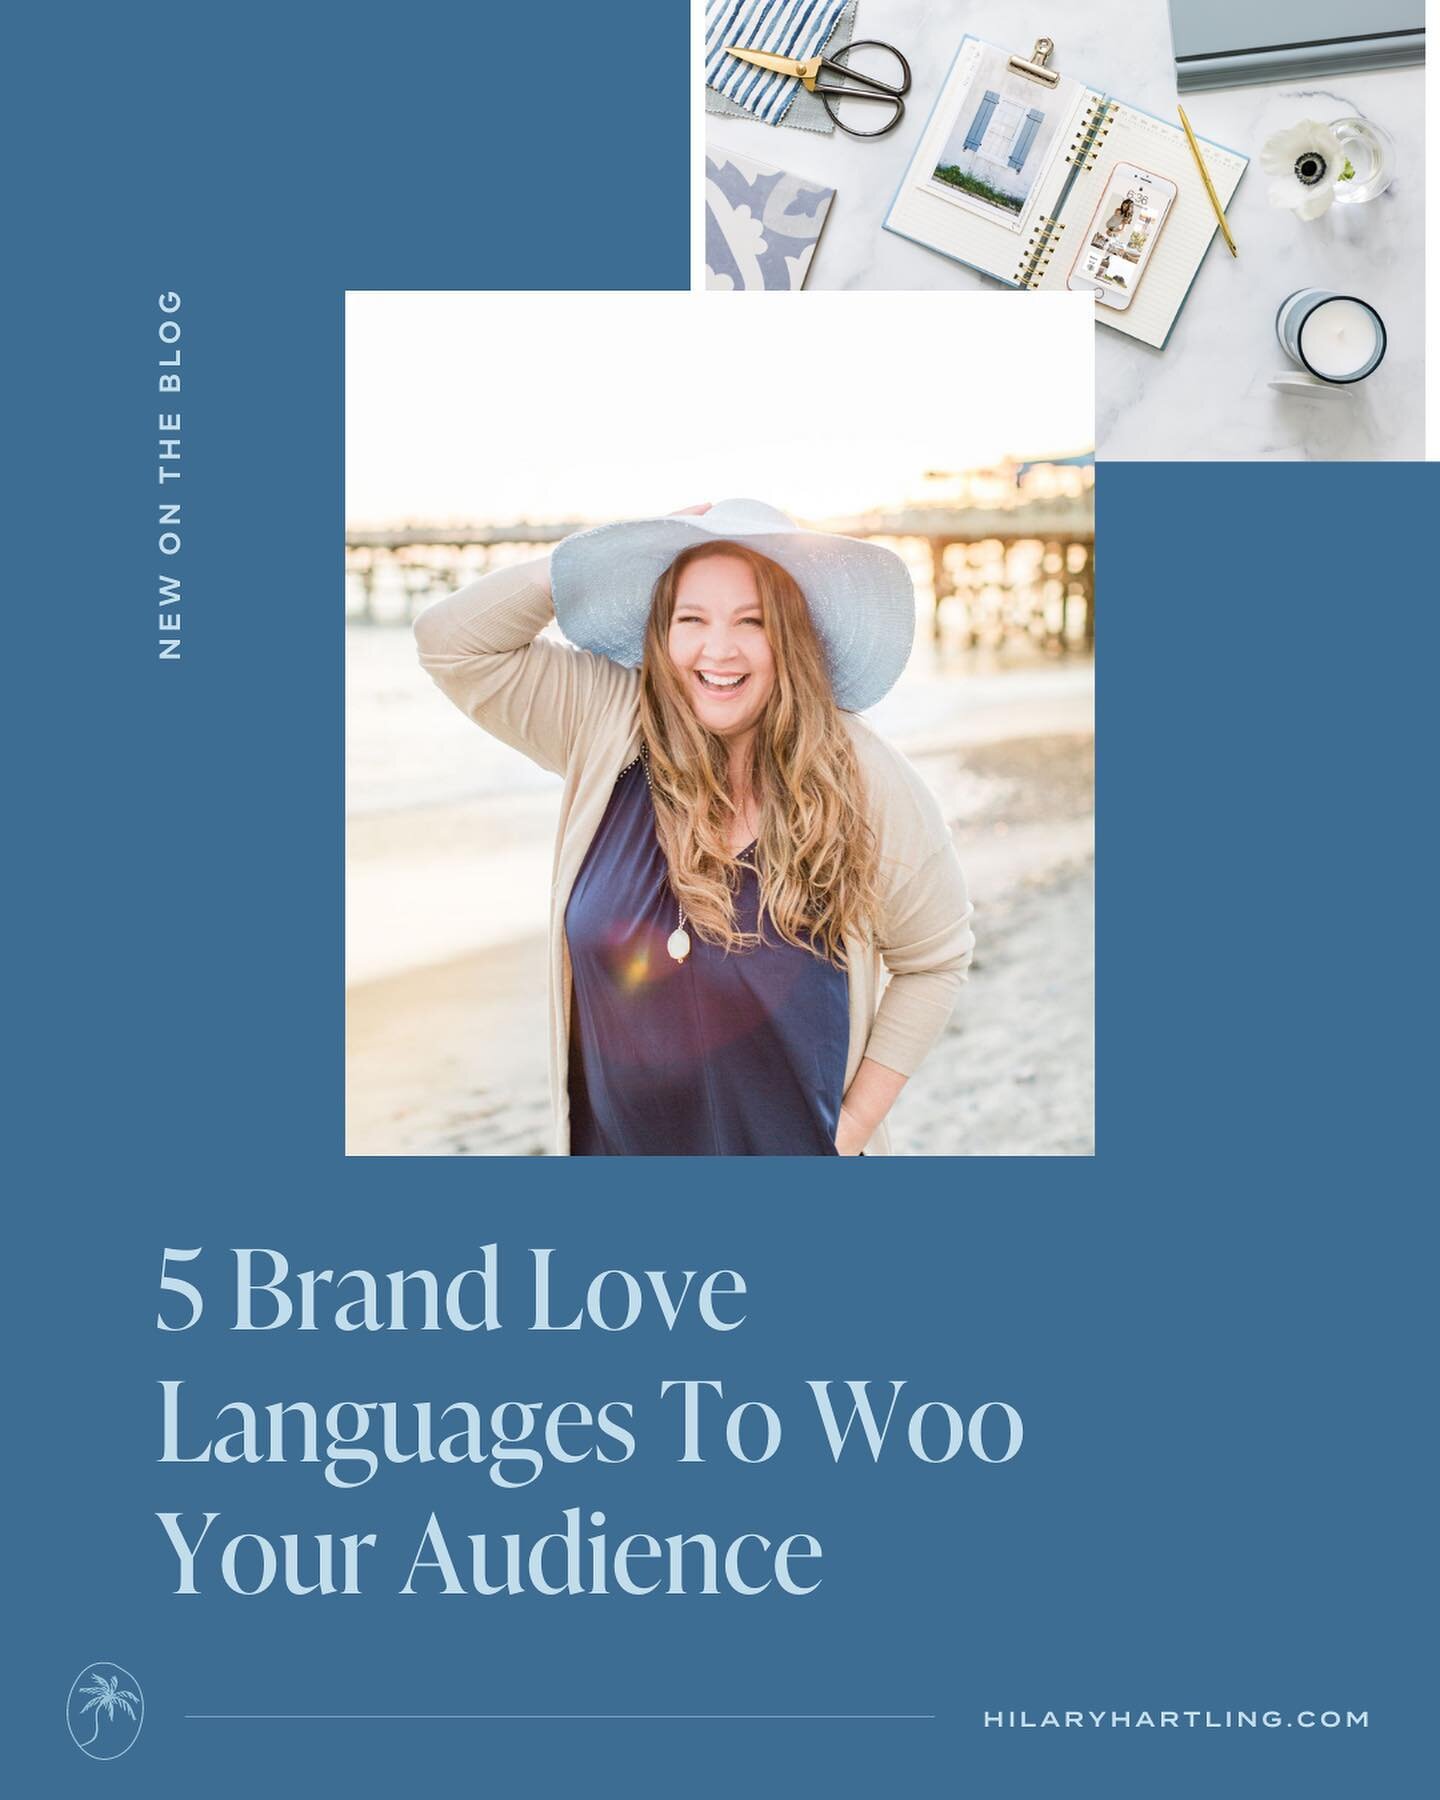 What&rsquo;s your PRIMARY &lsquo;Brand Love Language&rsquo;? ❣️ Plus, figure out your Brand Love Language &ldquo;content mix.

Your brand strategy positions your brand to move your audience and gives you the roadmap to create consistent content that 